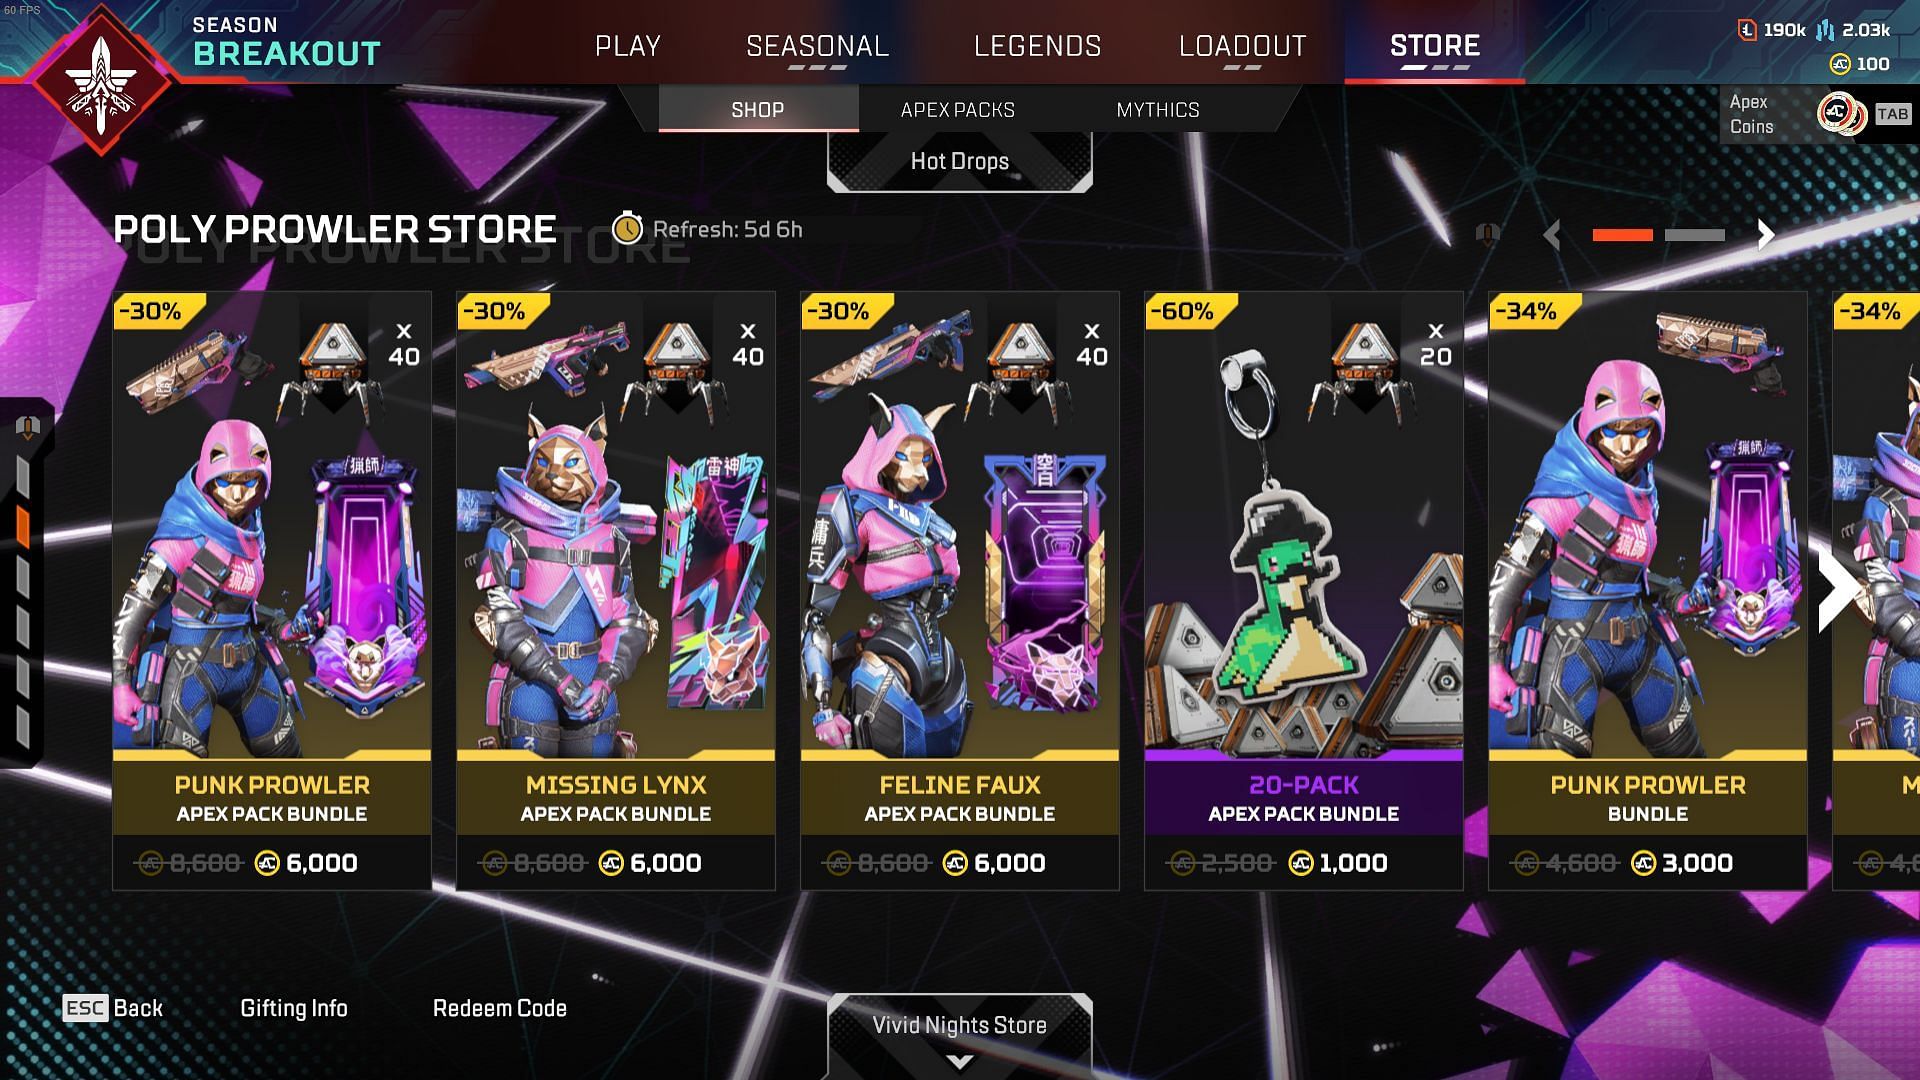 Poly Prowler Store in Apex Legends (Image via Electronic Arts)